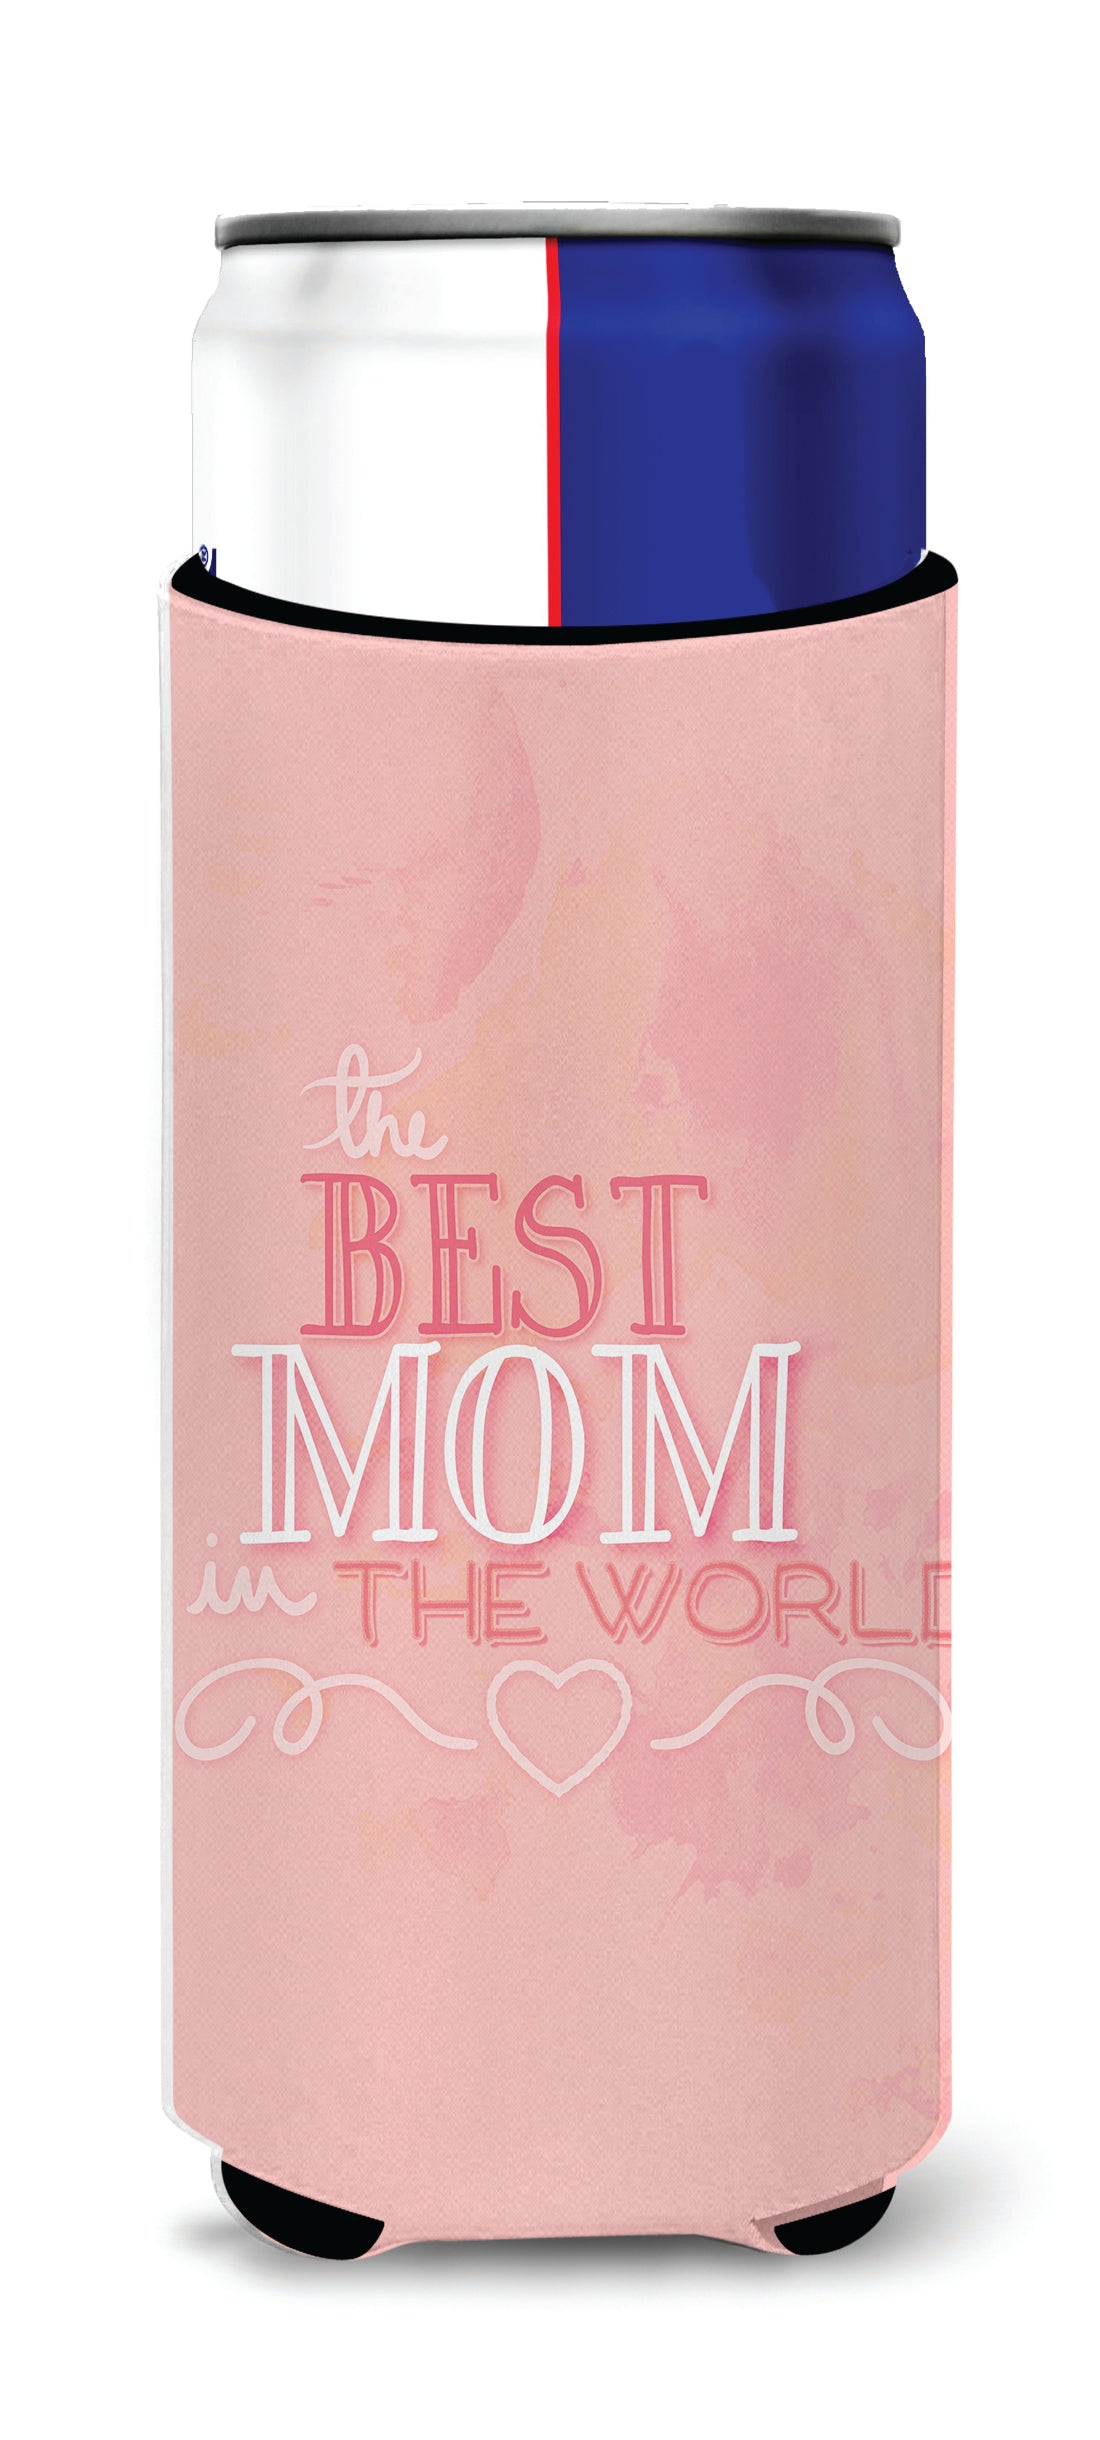 The Best Mom in the World Pink  Ultra Hugger for slim cans BB5419MUK